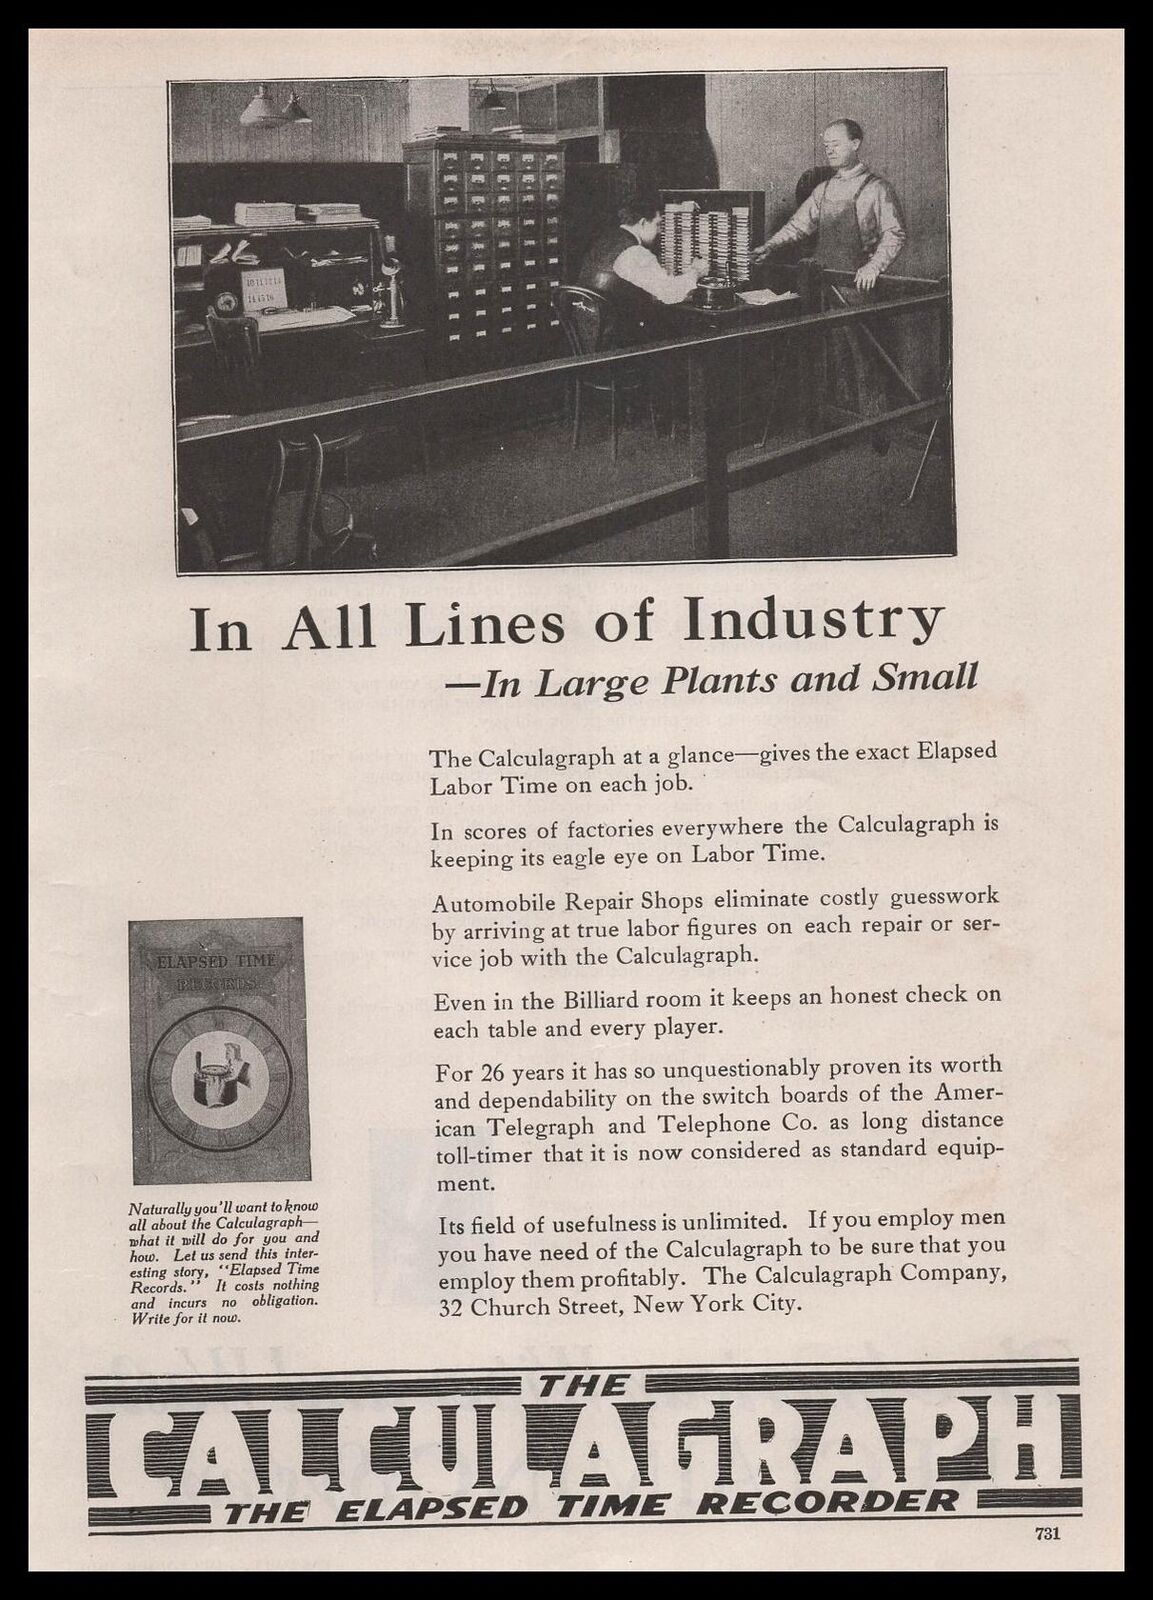 1921 The Calculagraph Co. New York City Photo AT&T Switchboards Vintage Print Ad